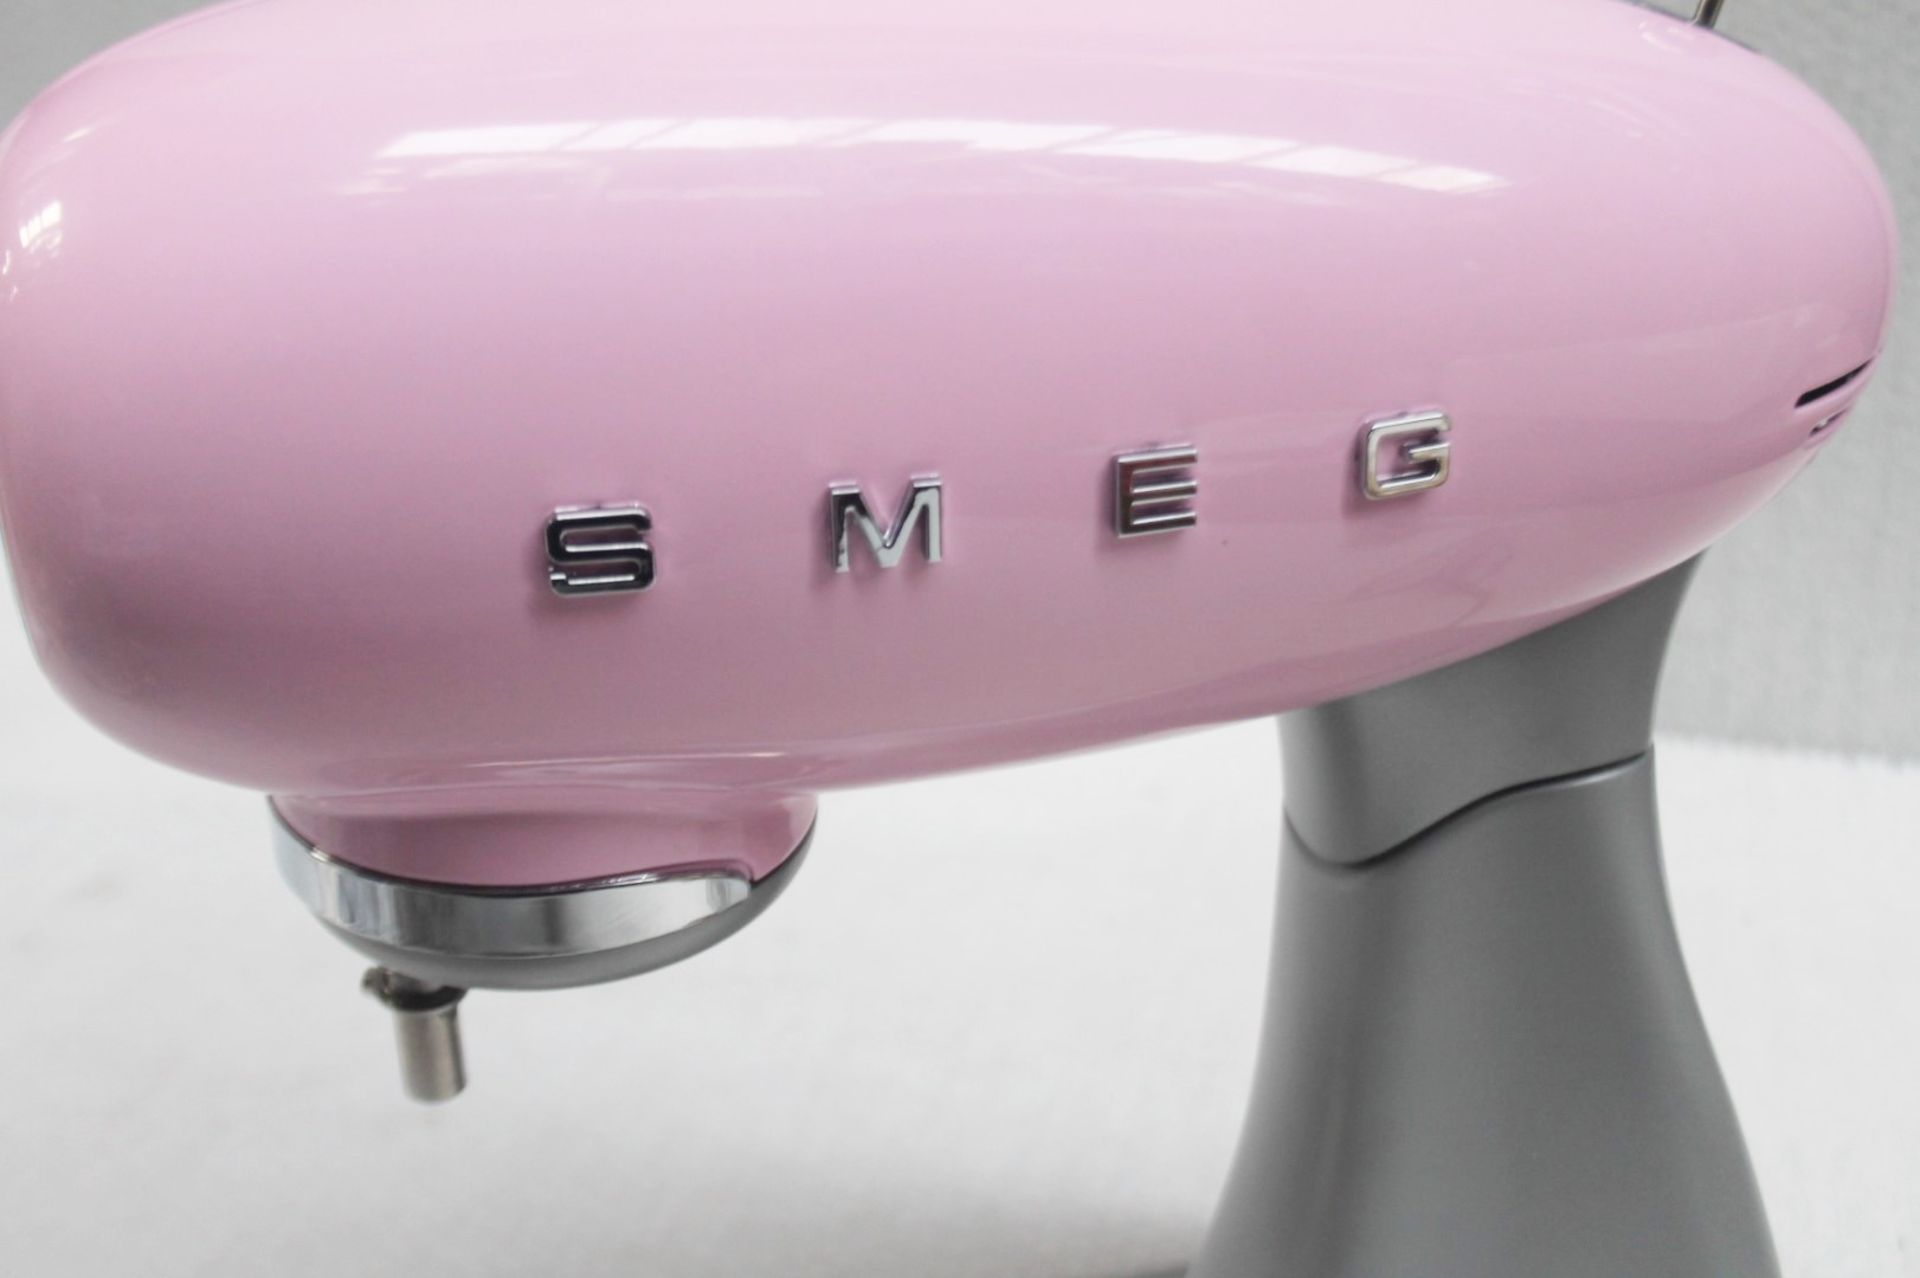 1 x SMEG 50's Retro Stand Mixer In Pink With 4.8 Litre Bowl And Accessories - RRP £499.00 - Image 8 of 14